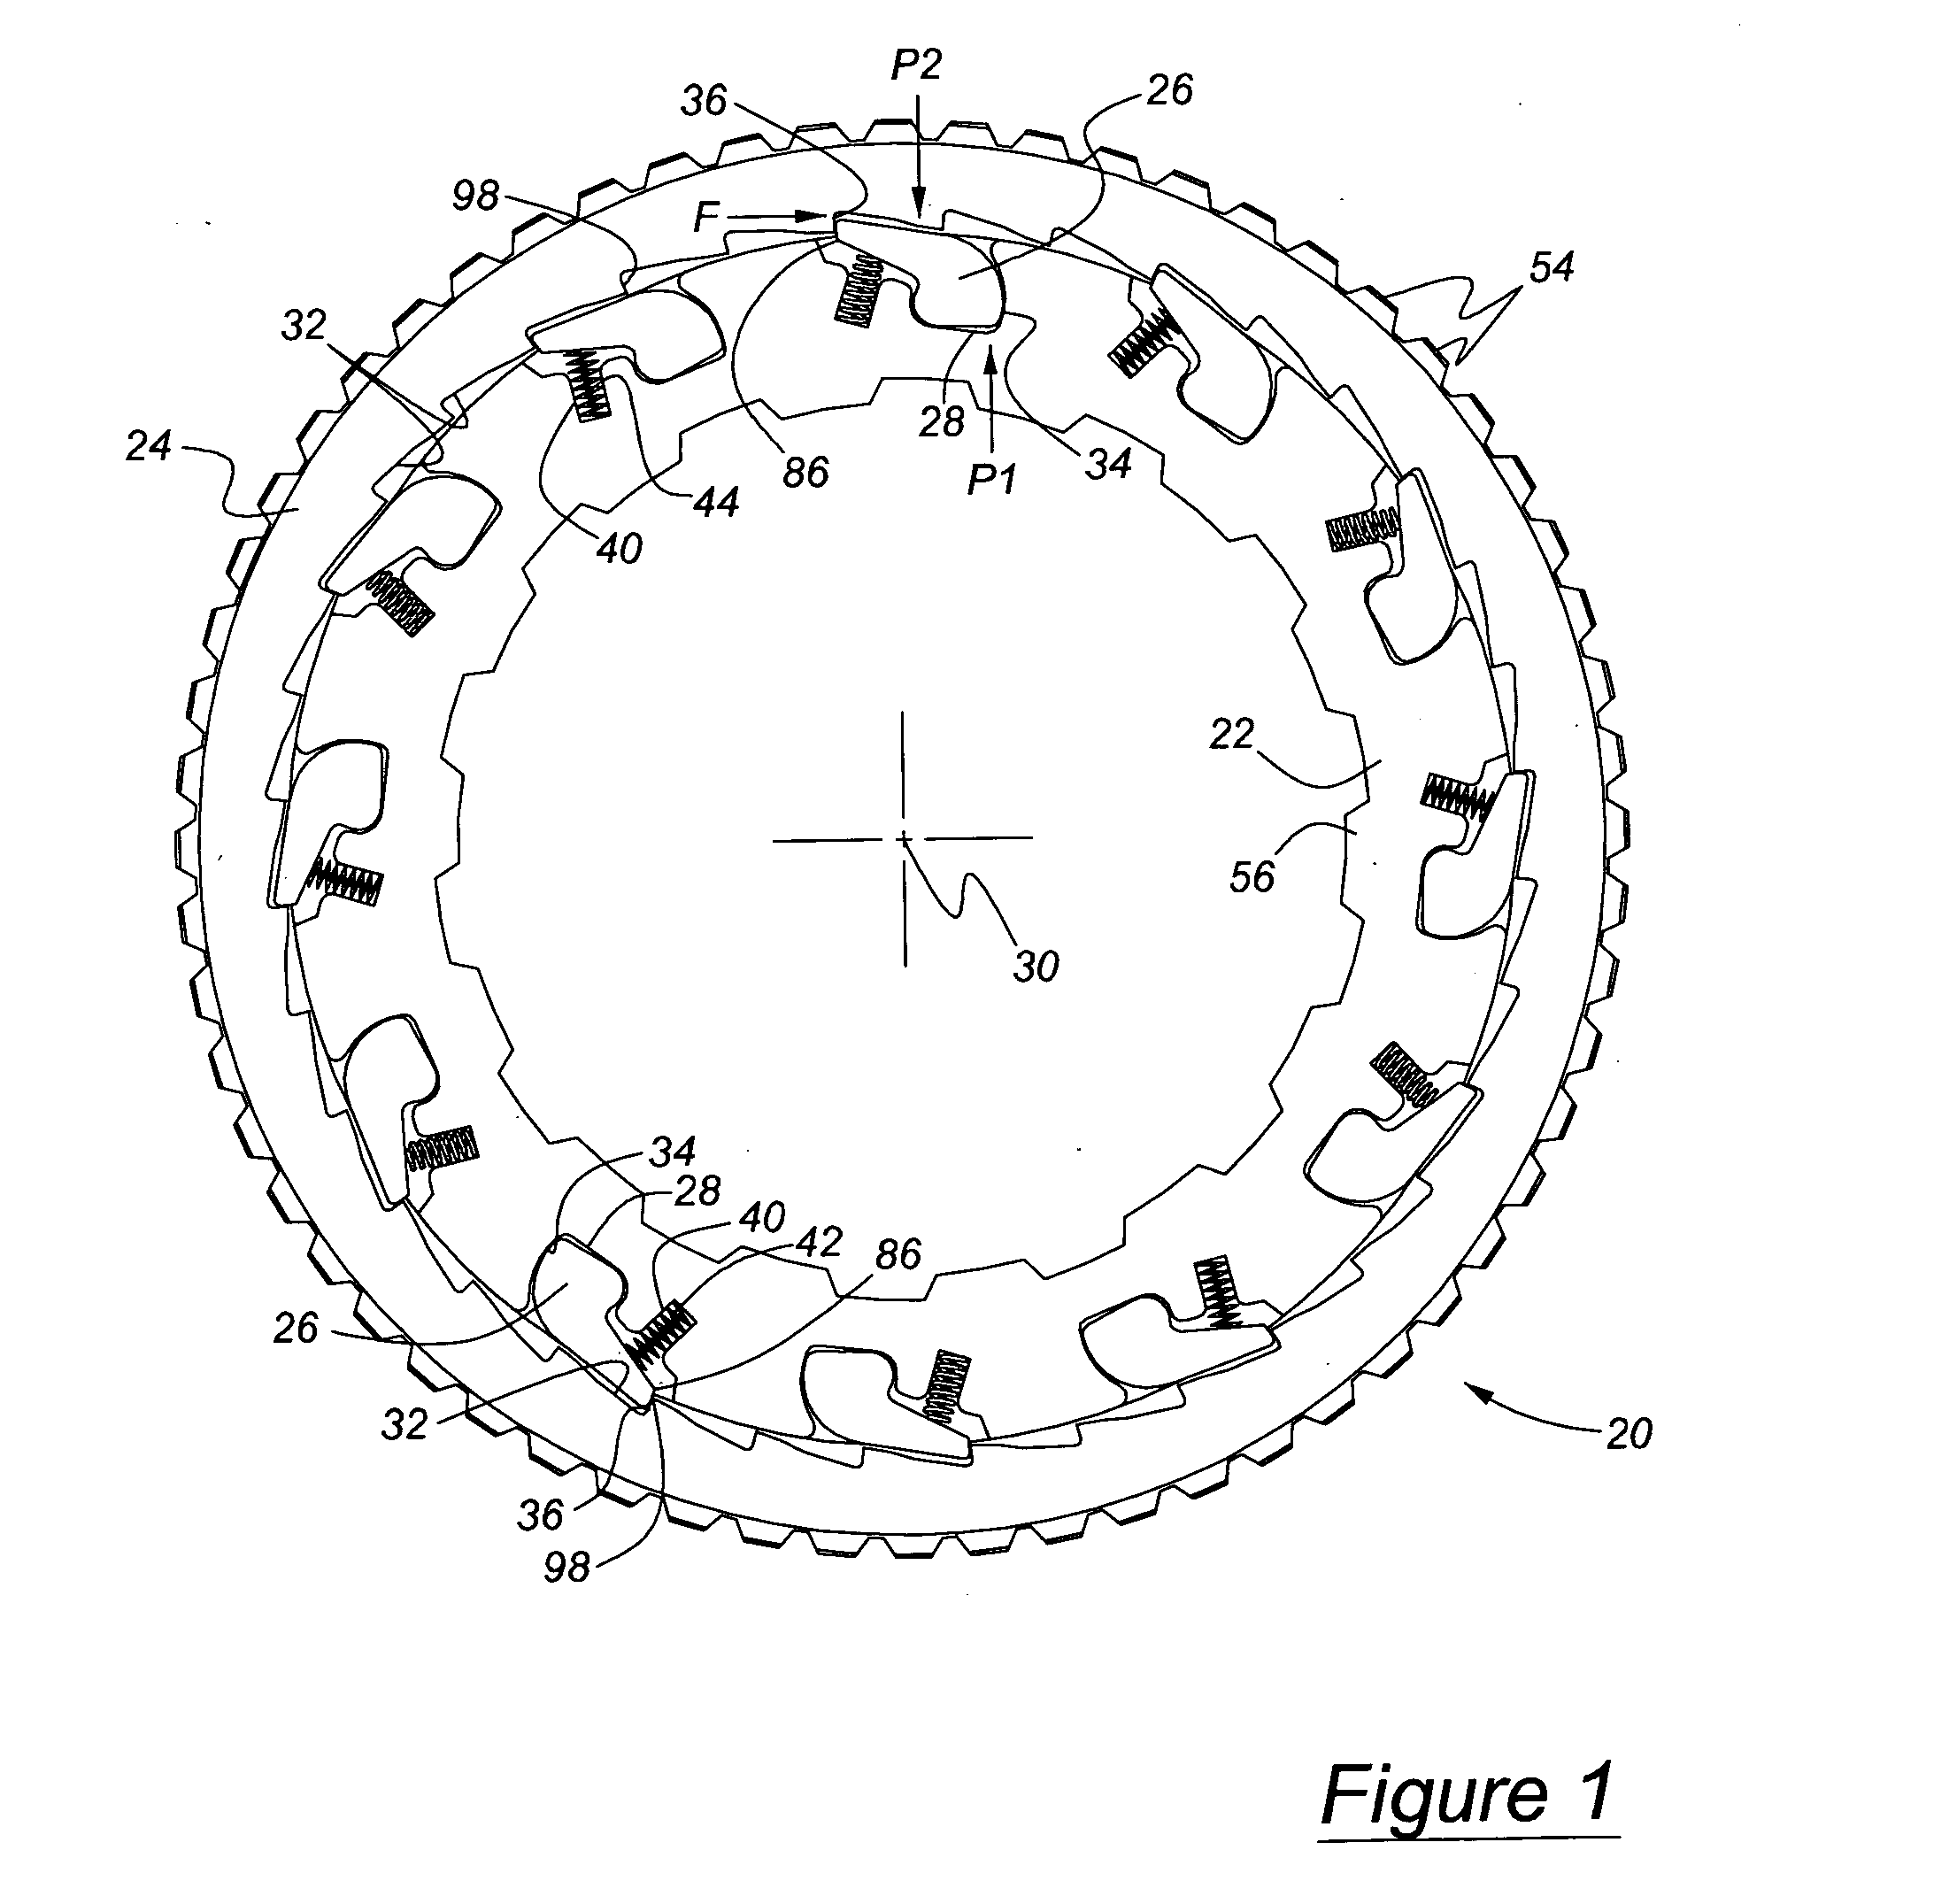 Ratcheting one-way clutch having rockers actuated by centrifugal force